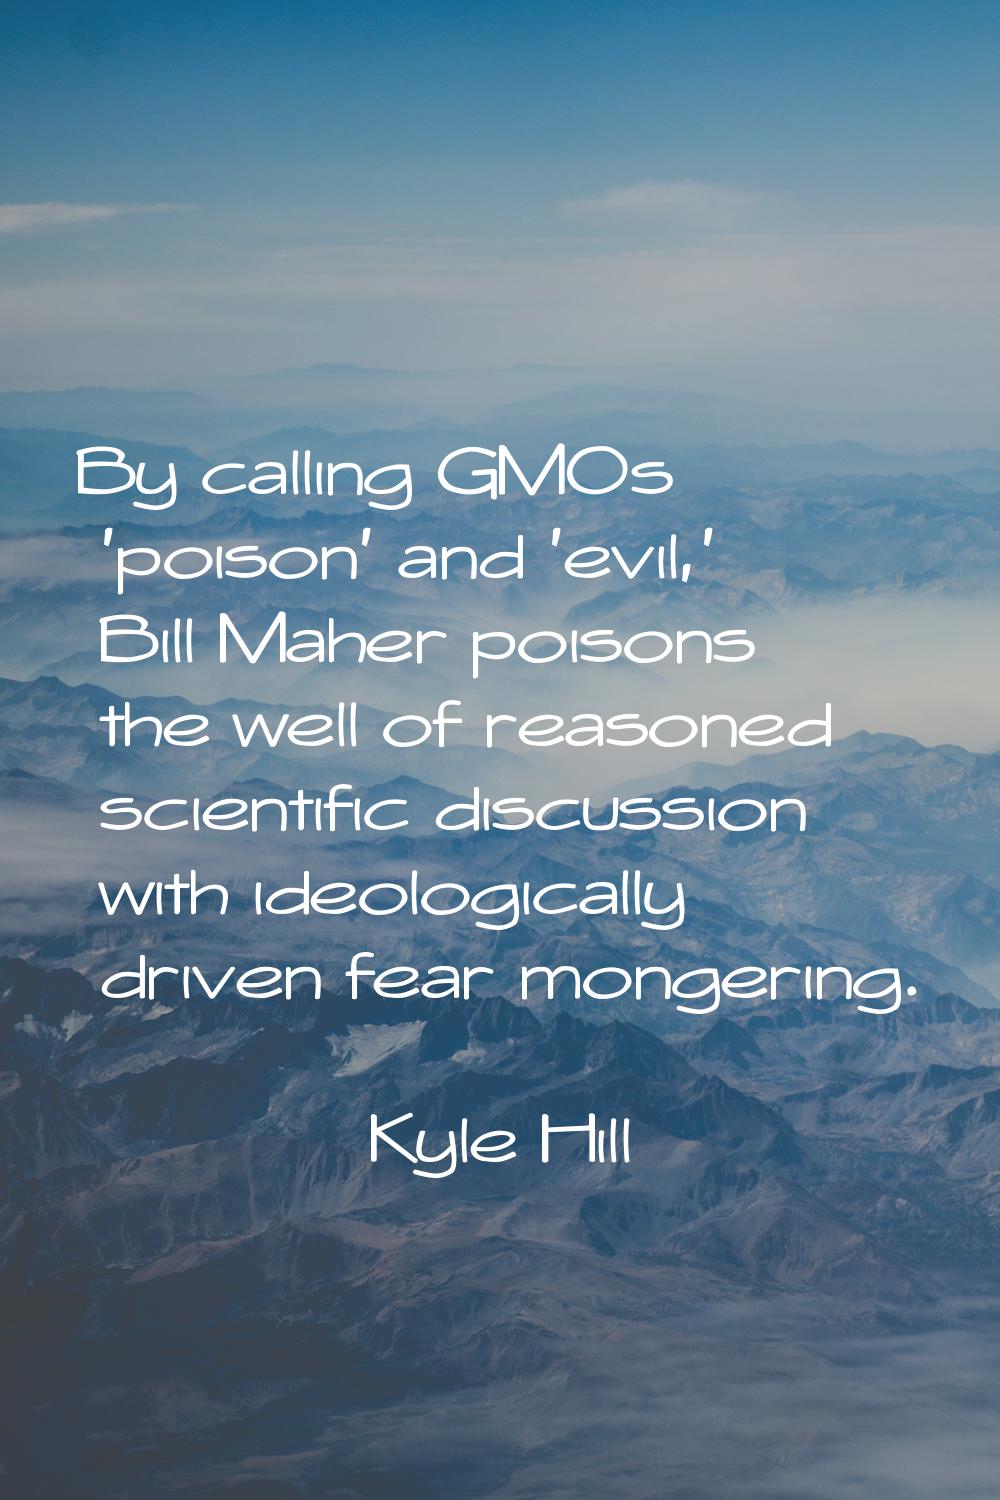 By calling GMOs 'poison' and 'evil,' Bill Maher poisons the well of reasoned scientific discussion 